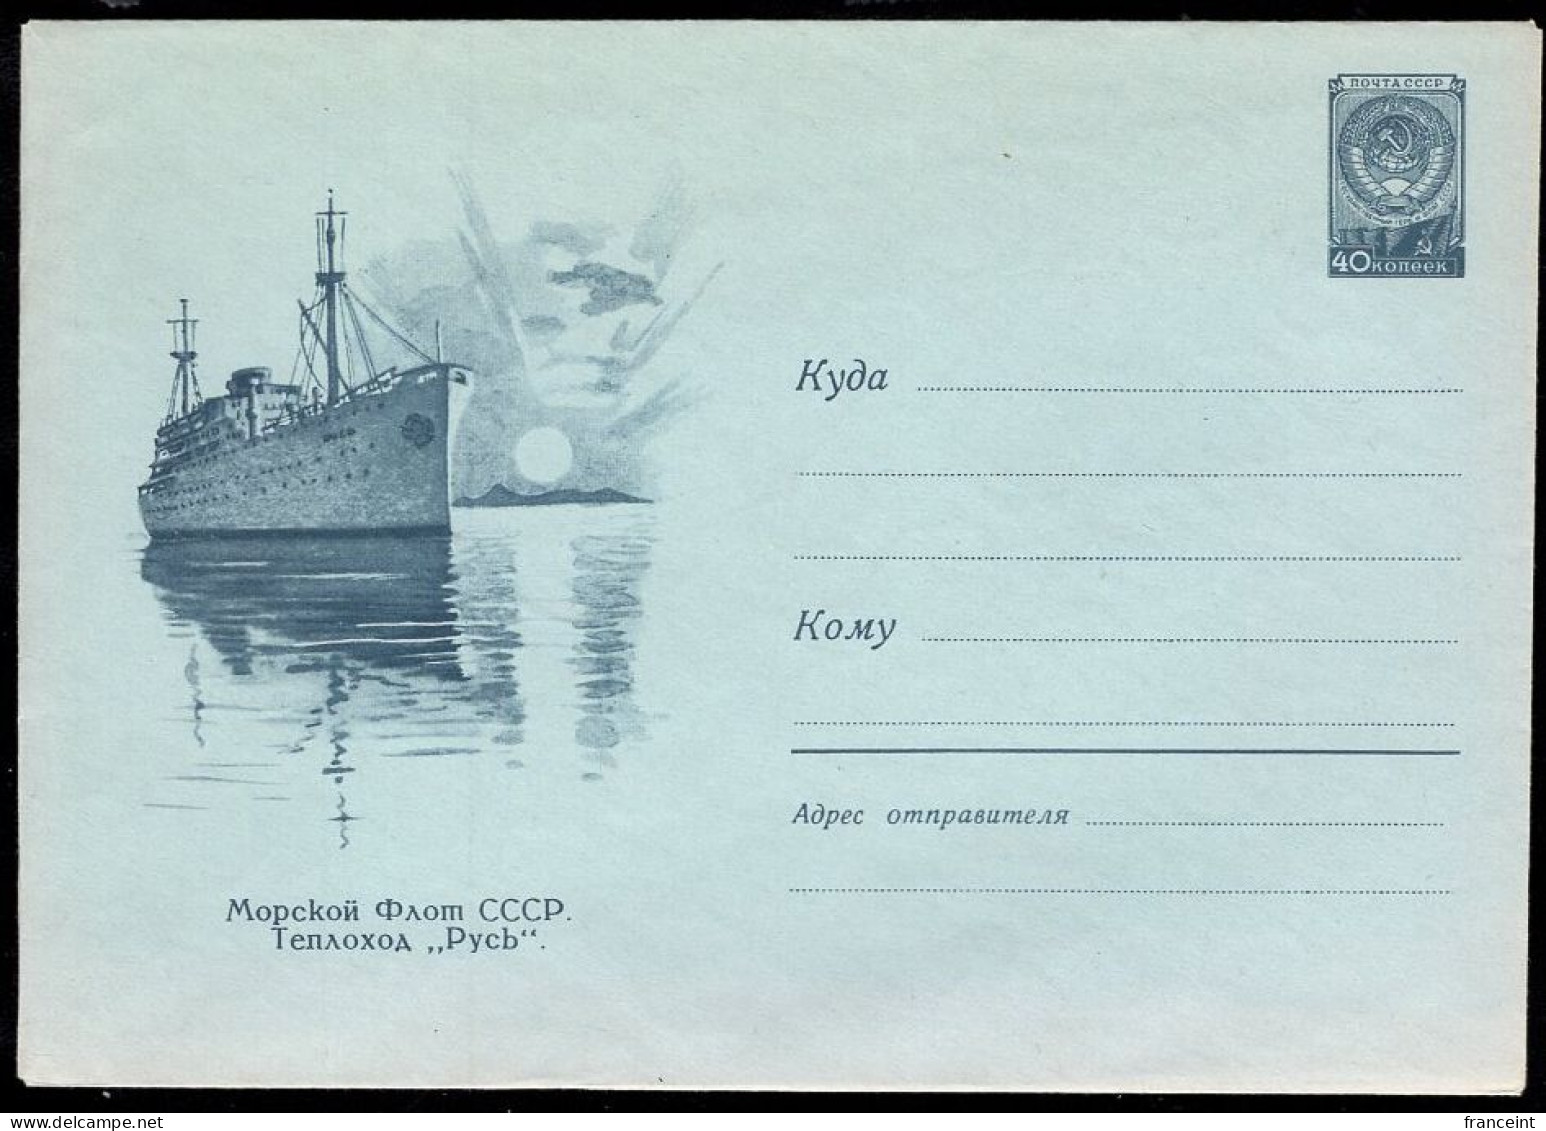 RUSSIA(1960) Russian Ship. 40 Kop Illustrated Entire. - 1950-59